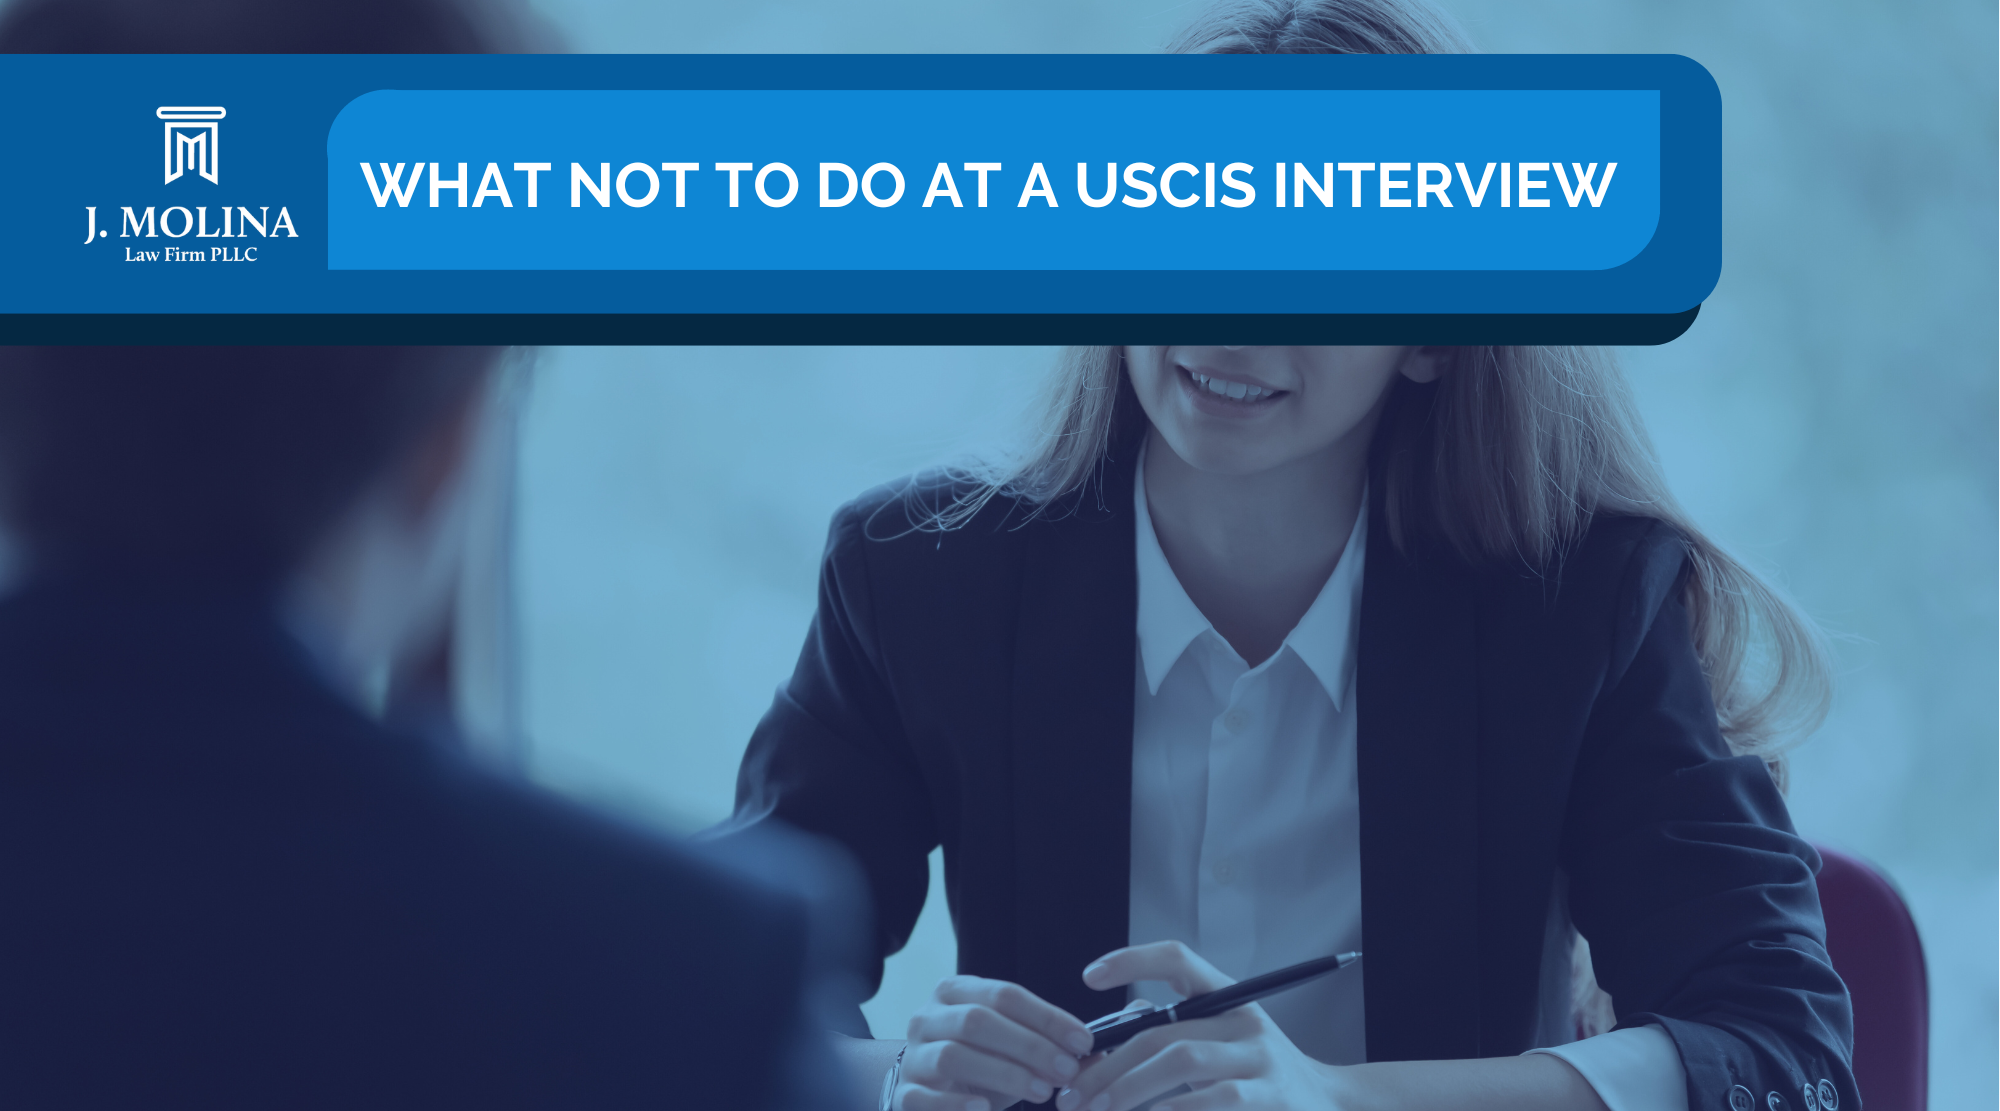 What not to do at a USCIS interview